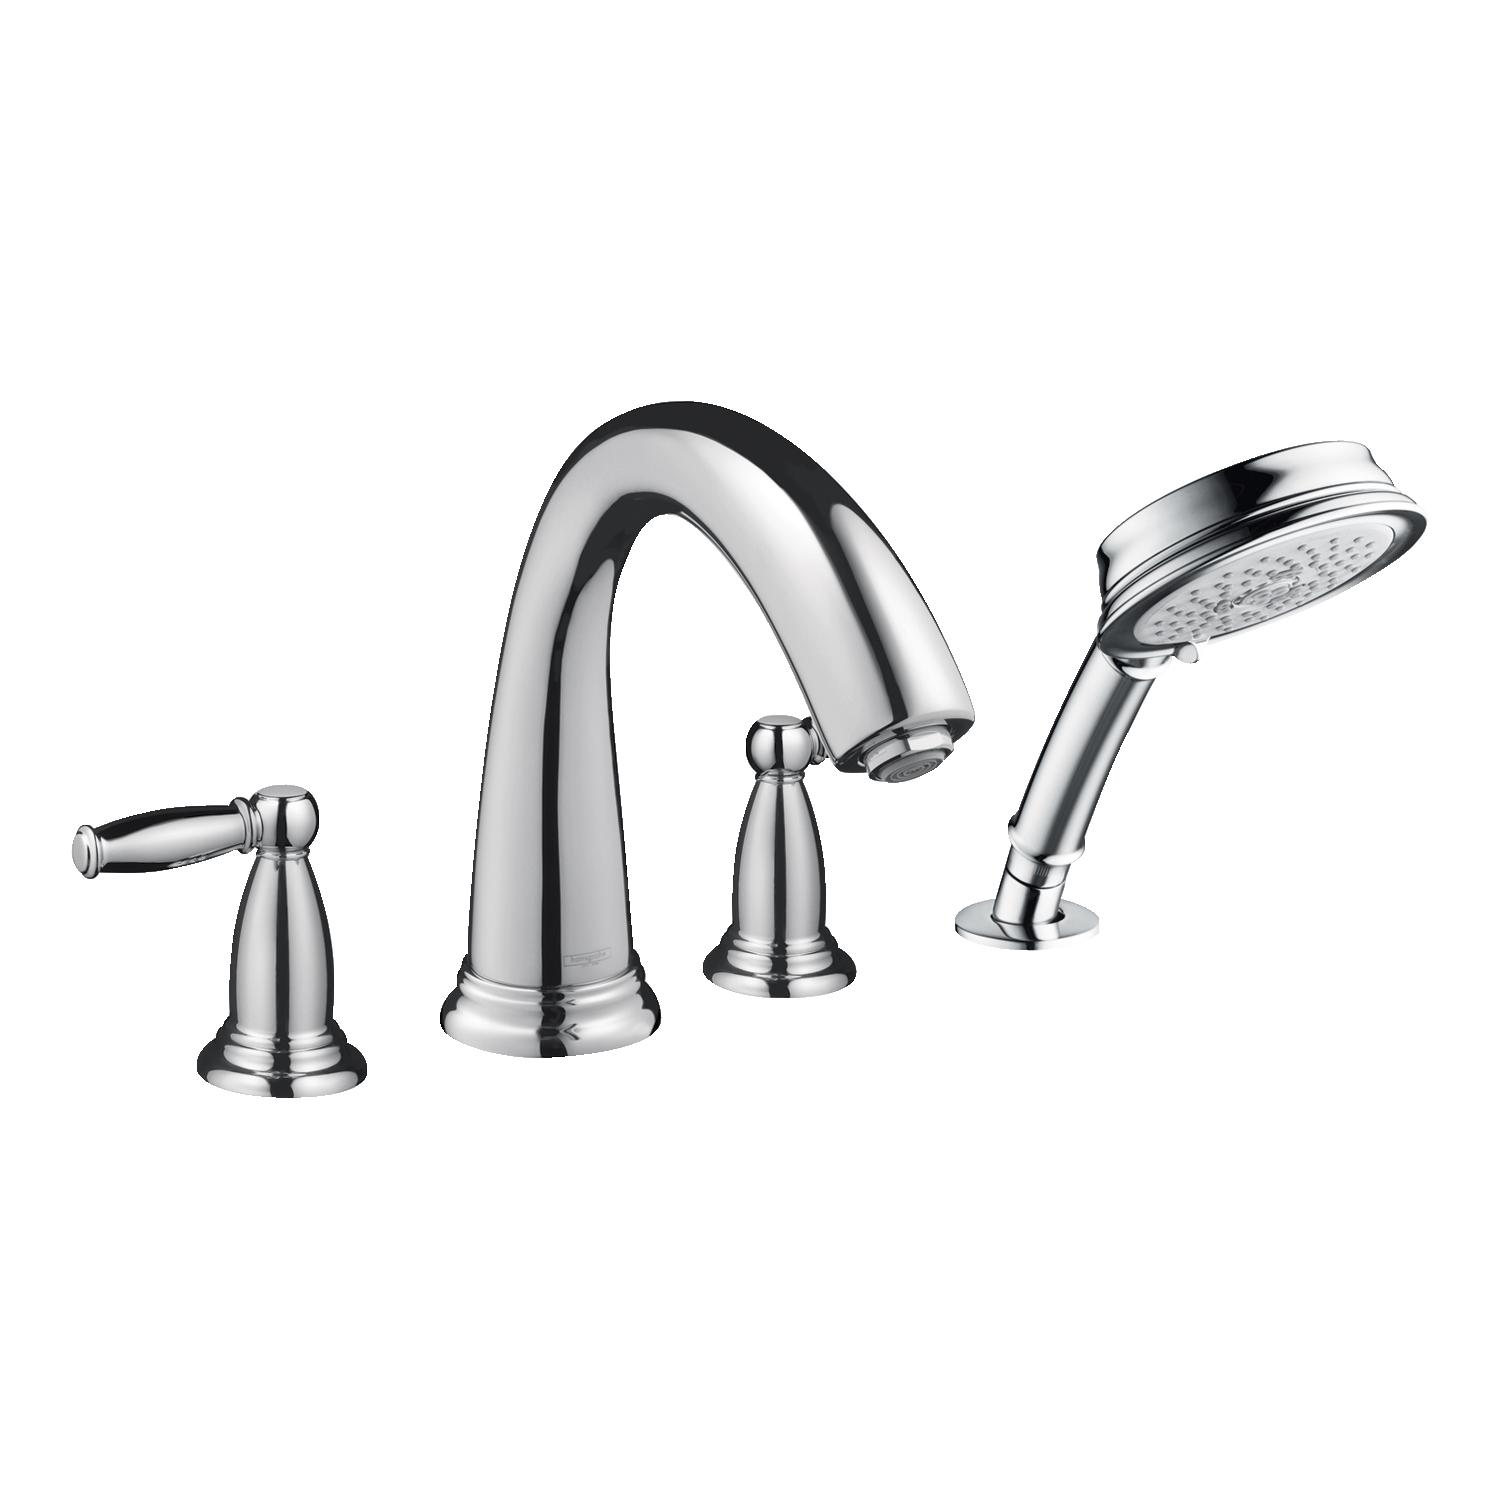 06132000 Hansgrohe Swing C 4-Hole Roman Tub Set Trim with Lever Handles and 1.8 GPM Handshower, Chrome